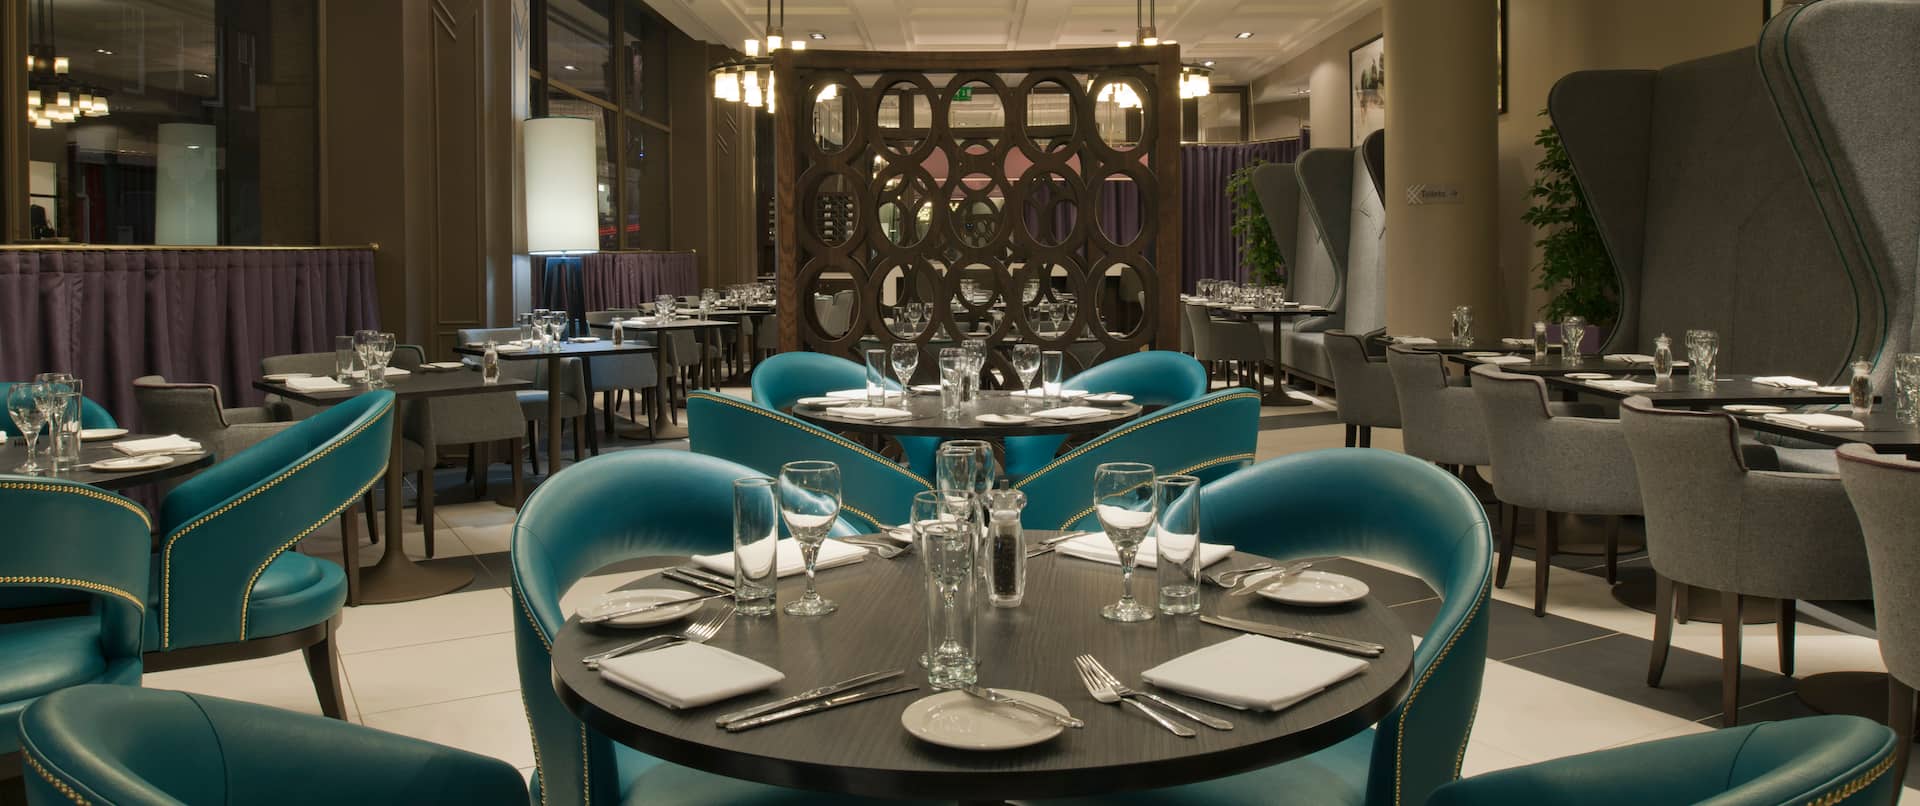 Booths, Green Chairs, Dining Tables With Place Settings and Glasses in Bread Street Brasserie Restaurant